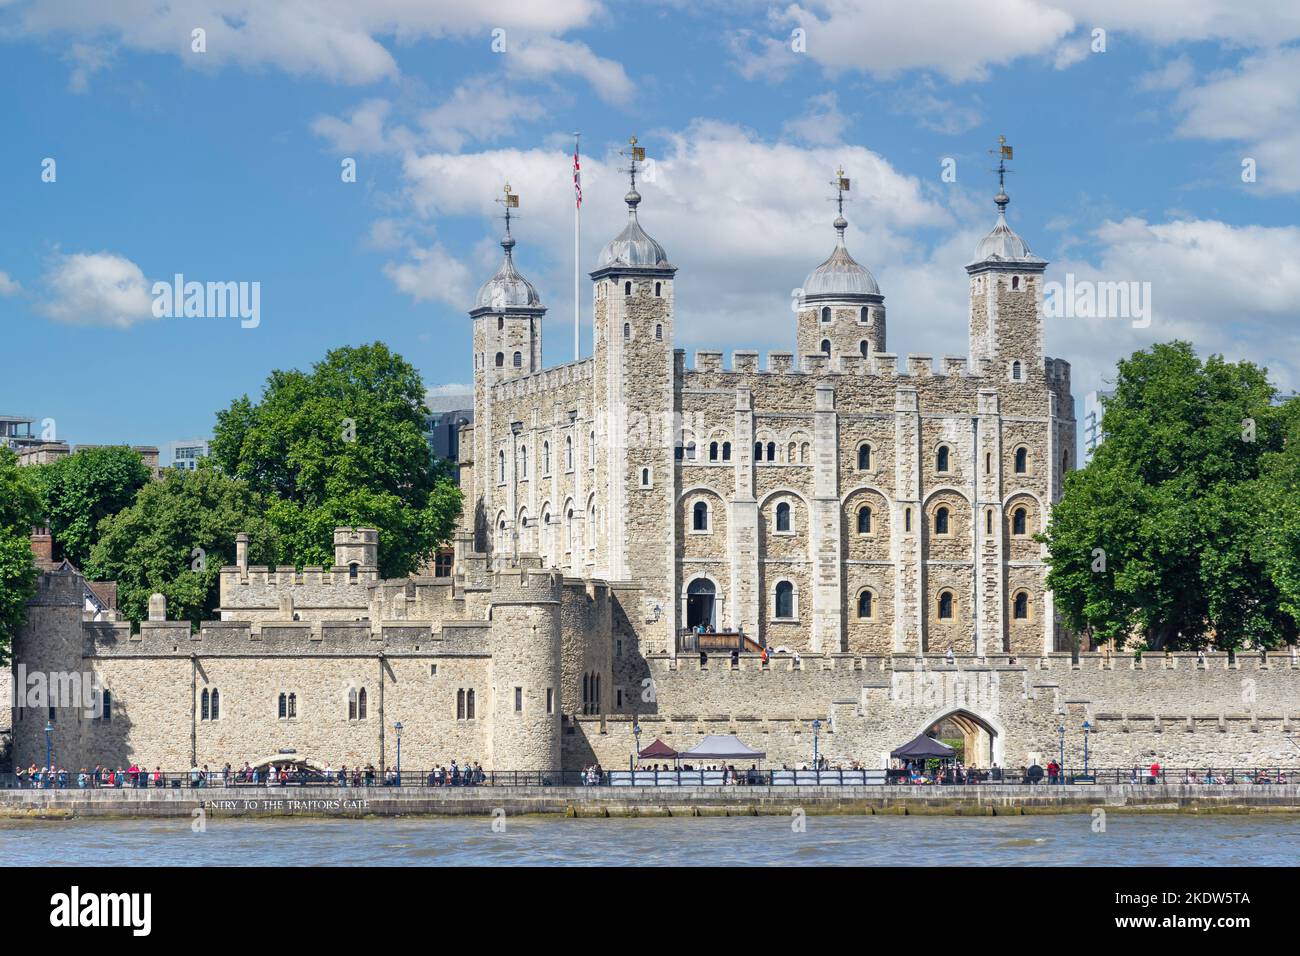 The Tower of London across River thames, Tower Hill, London Borough of Tower Hamlets, Greater London, England, United Kingdom Stock Photo